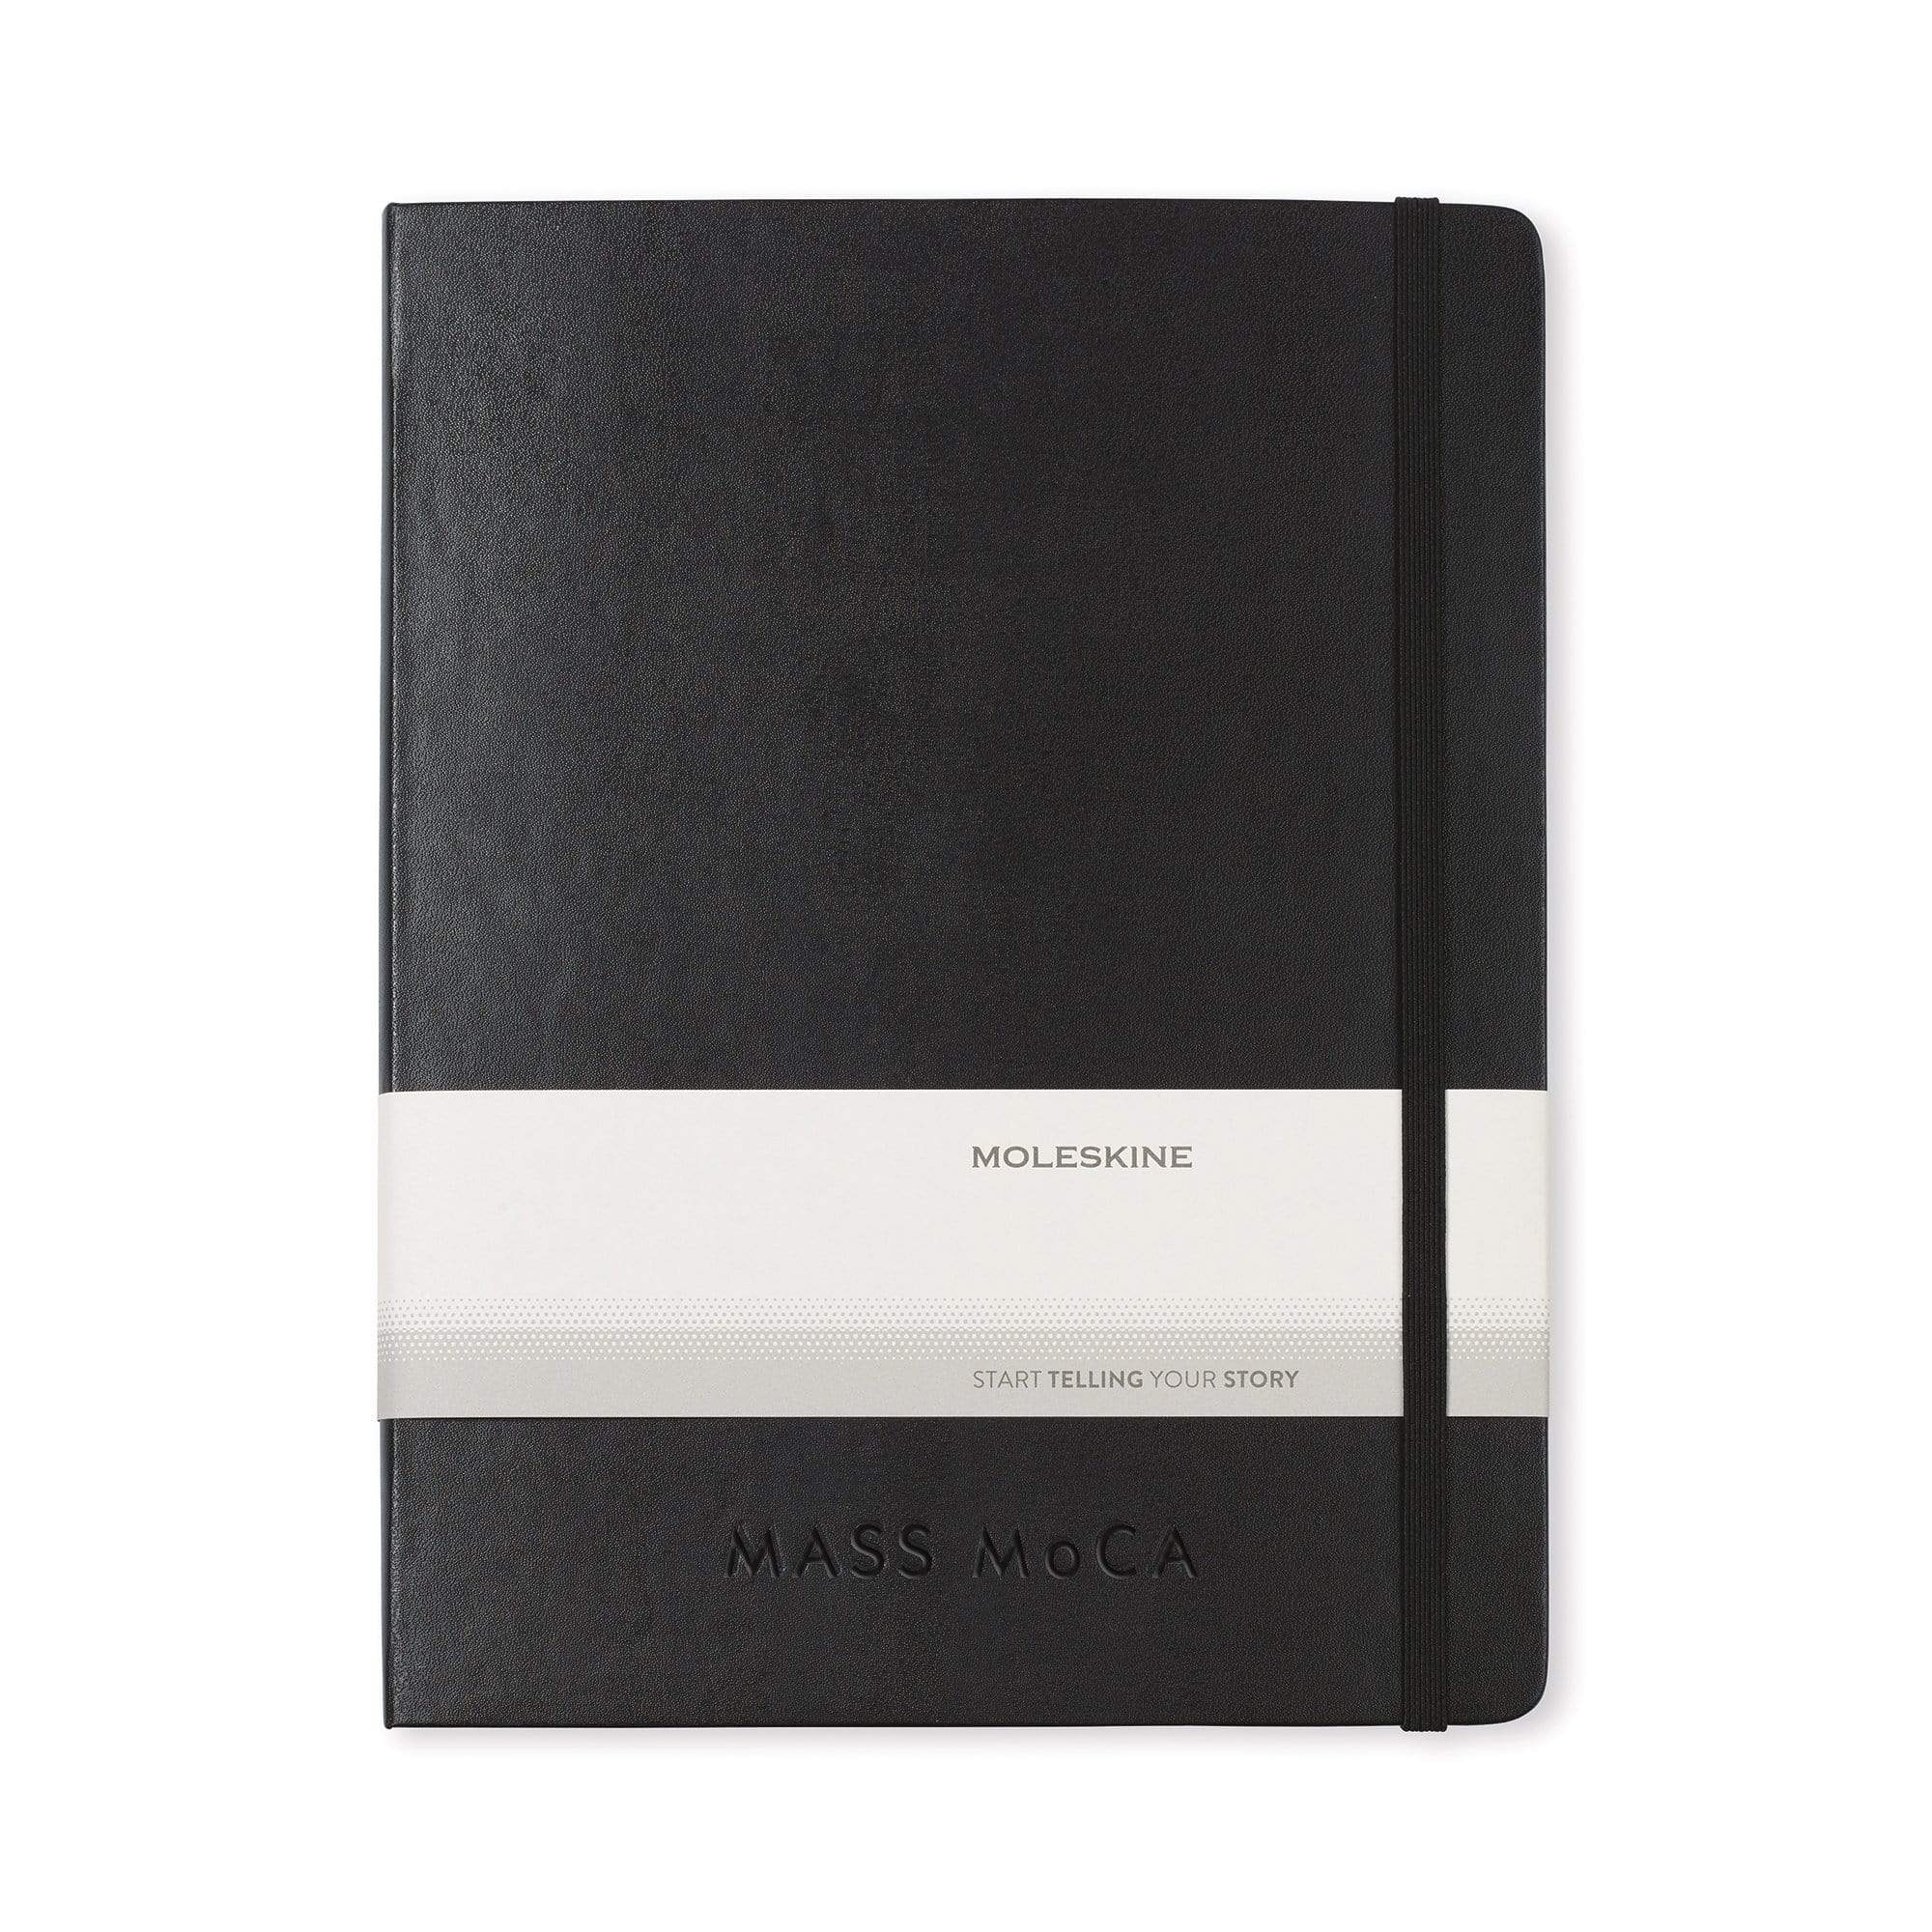 Moleskine Accessories One Size / Black Moleskine - Hard Cover Extra Large Double Layout Notebook (7.5" x  9.75")